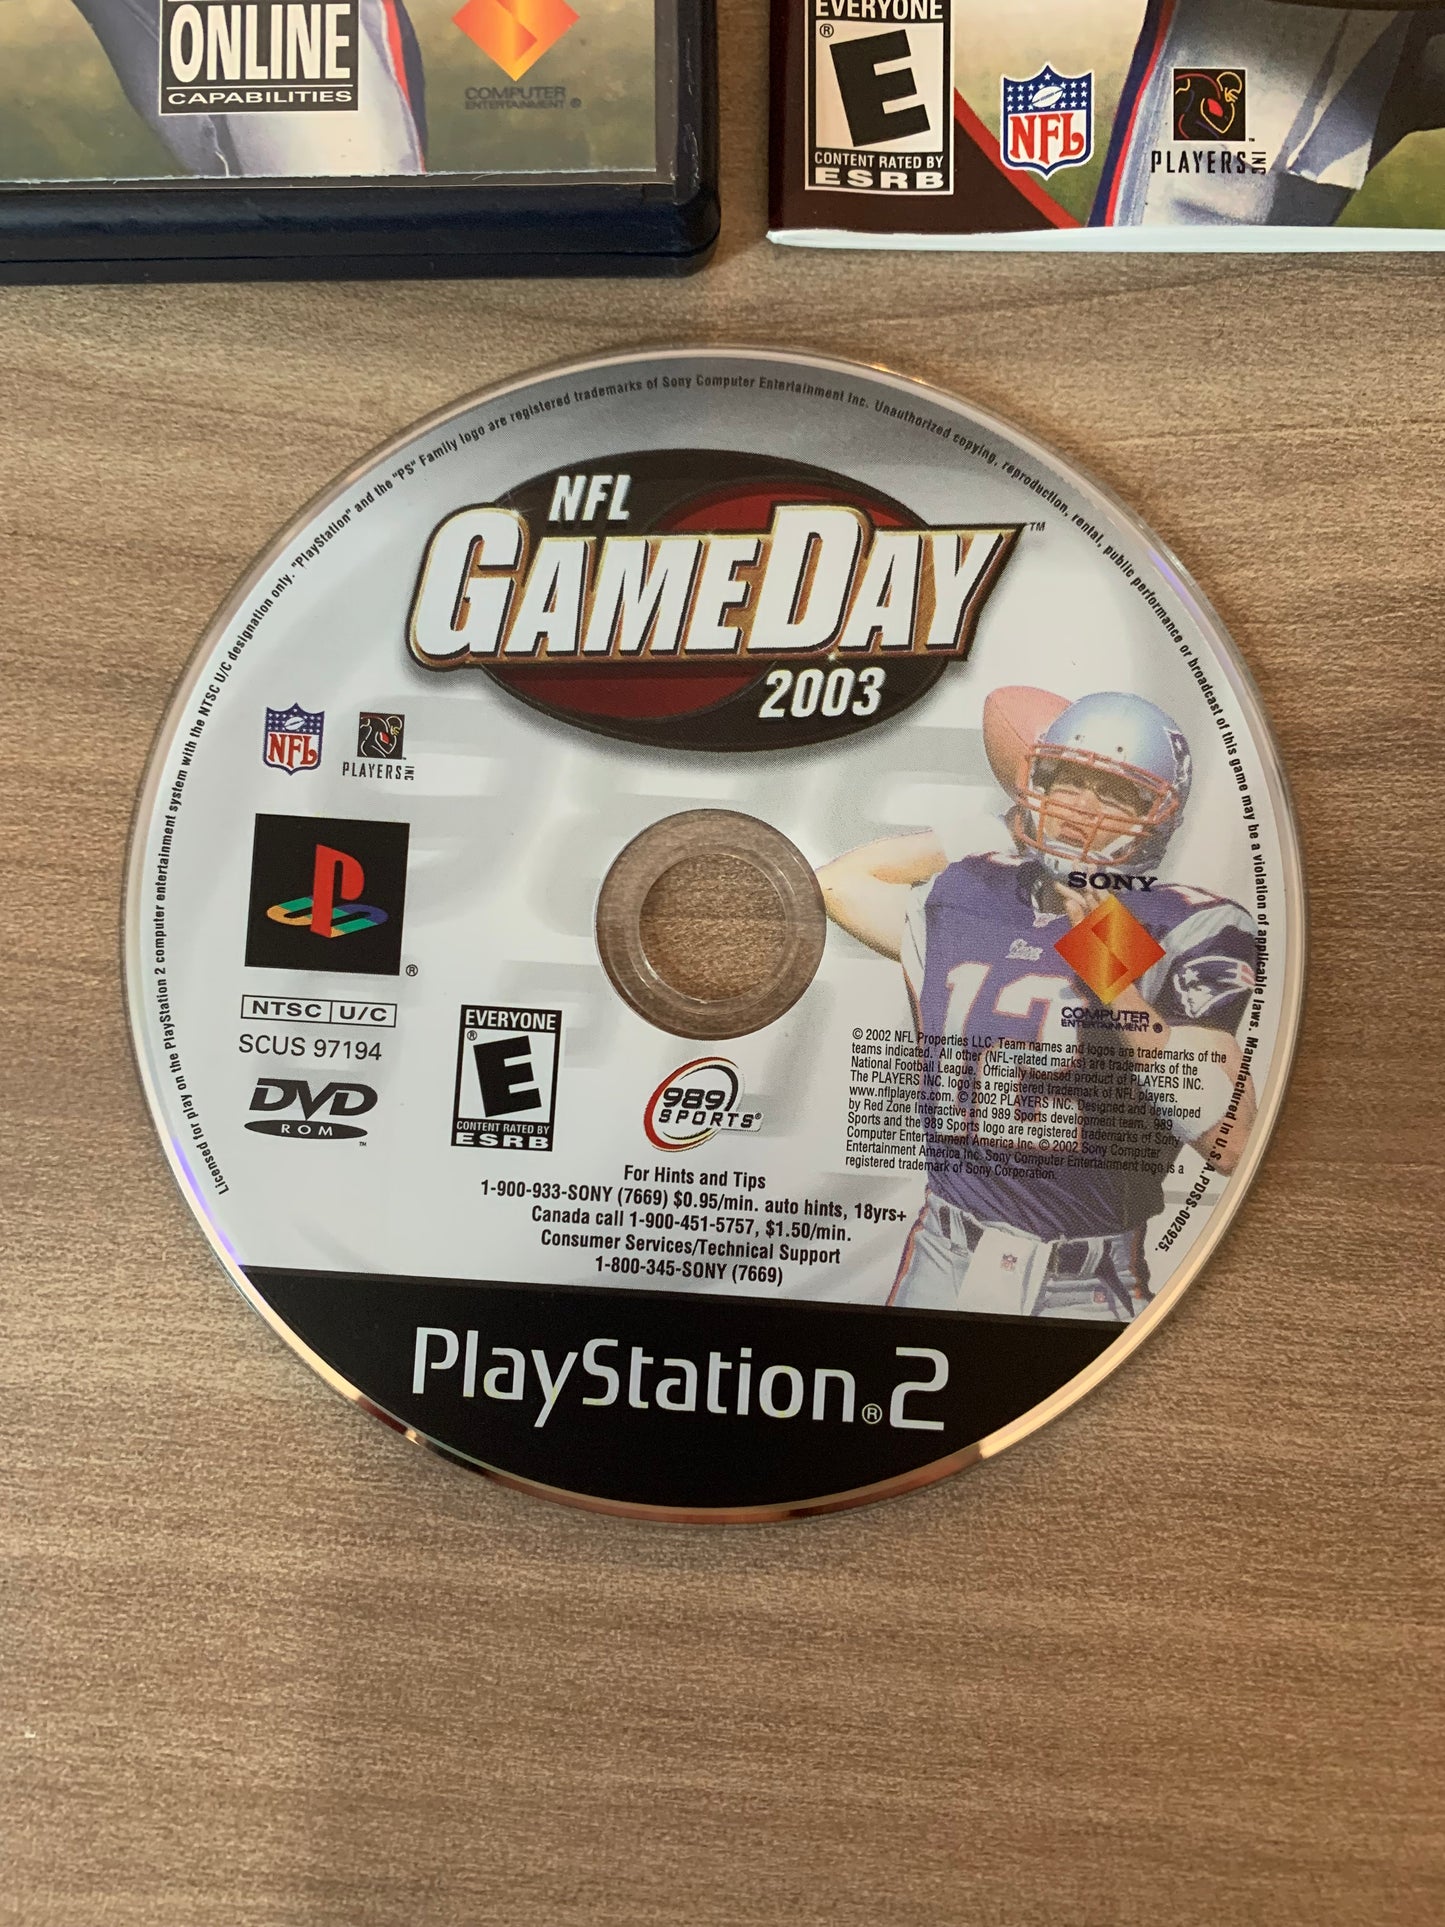 SONY PLAYSTATiON 2 [PS2] | NFL GAMEDAY 2003